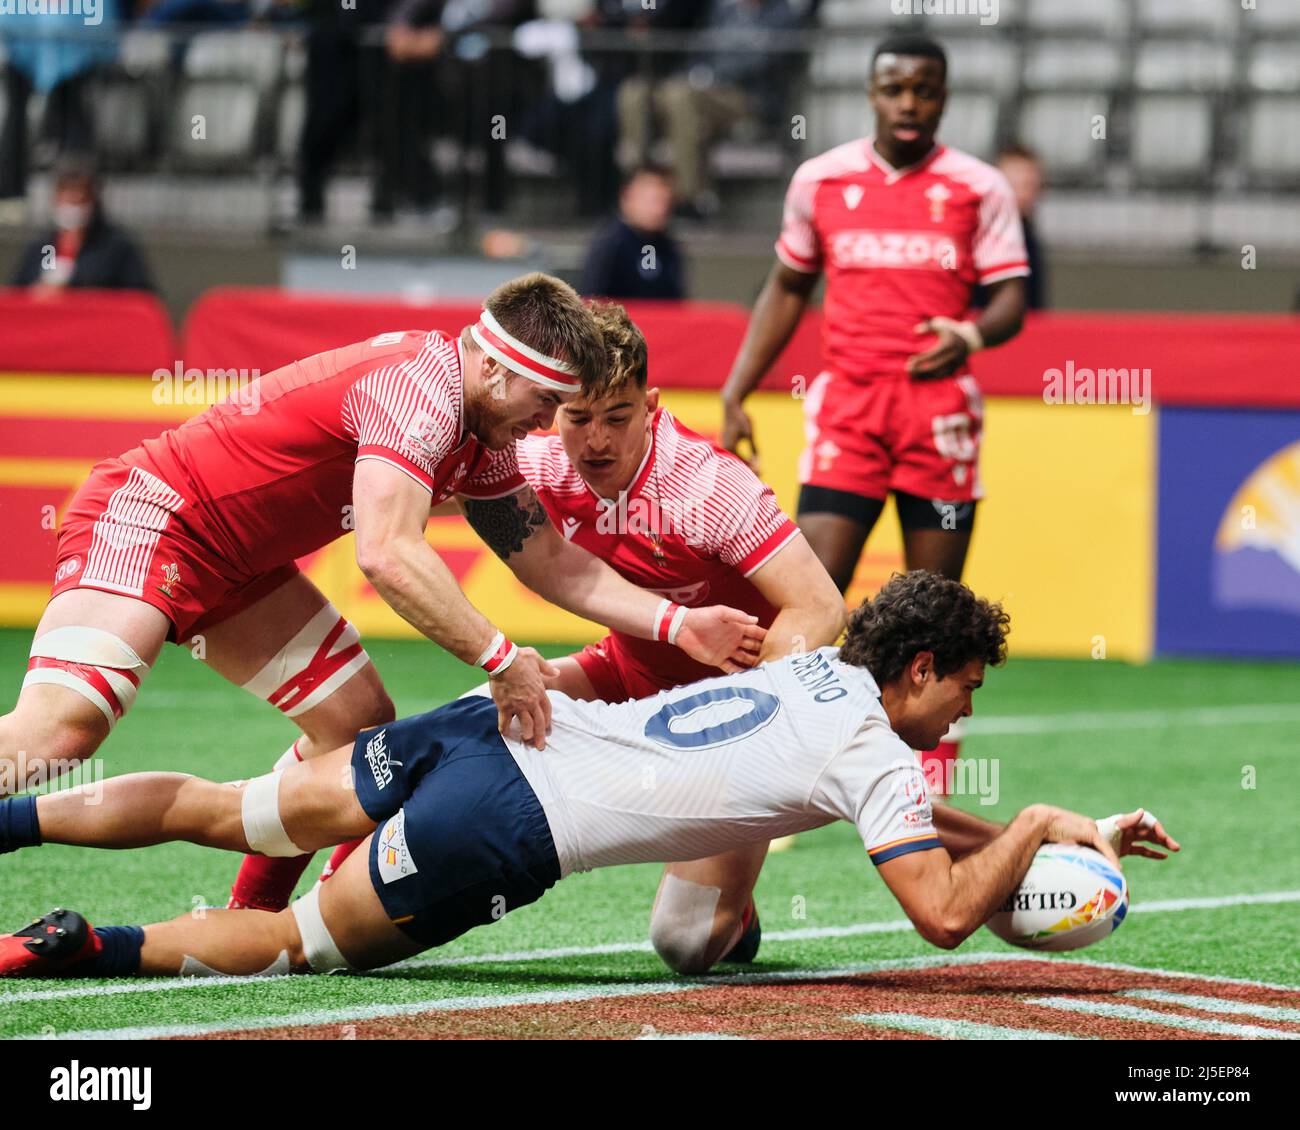 Vancouver, Canada. 17th April, 2022. Spain rugby sevens player Manu Moreno #10 scores a try against Wales during the HSBC World Rugby Sevens Series 20 Stock Photo